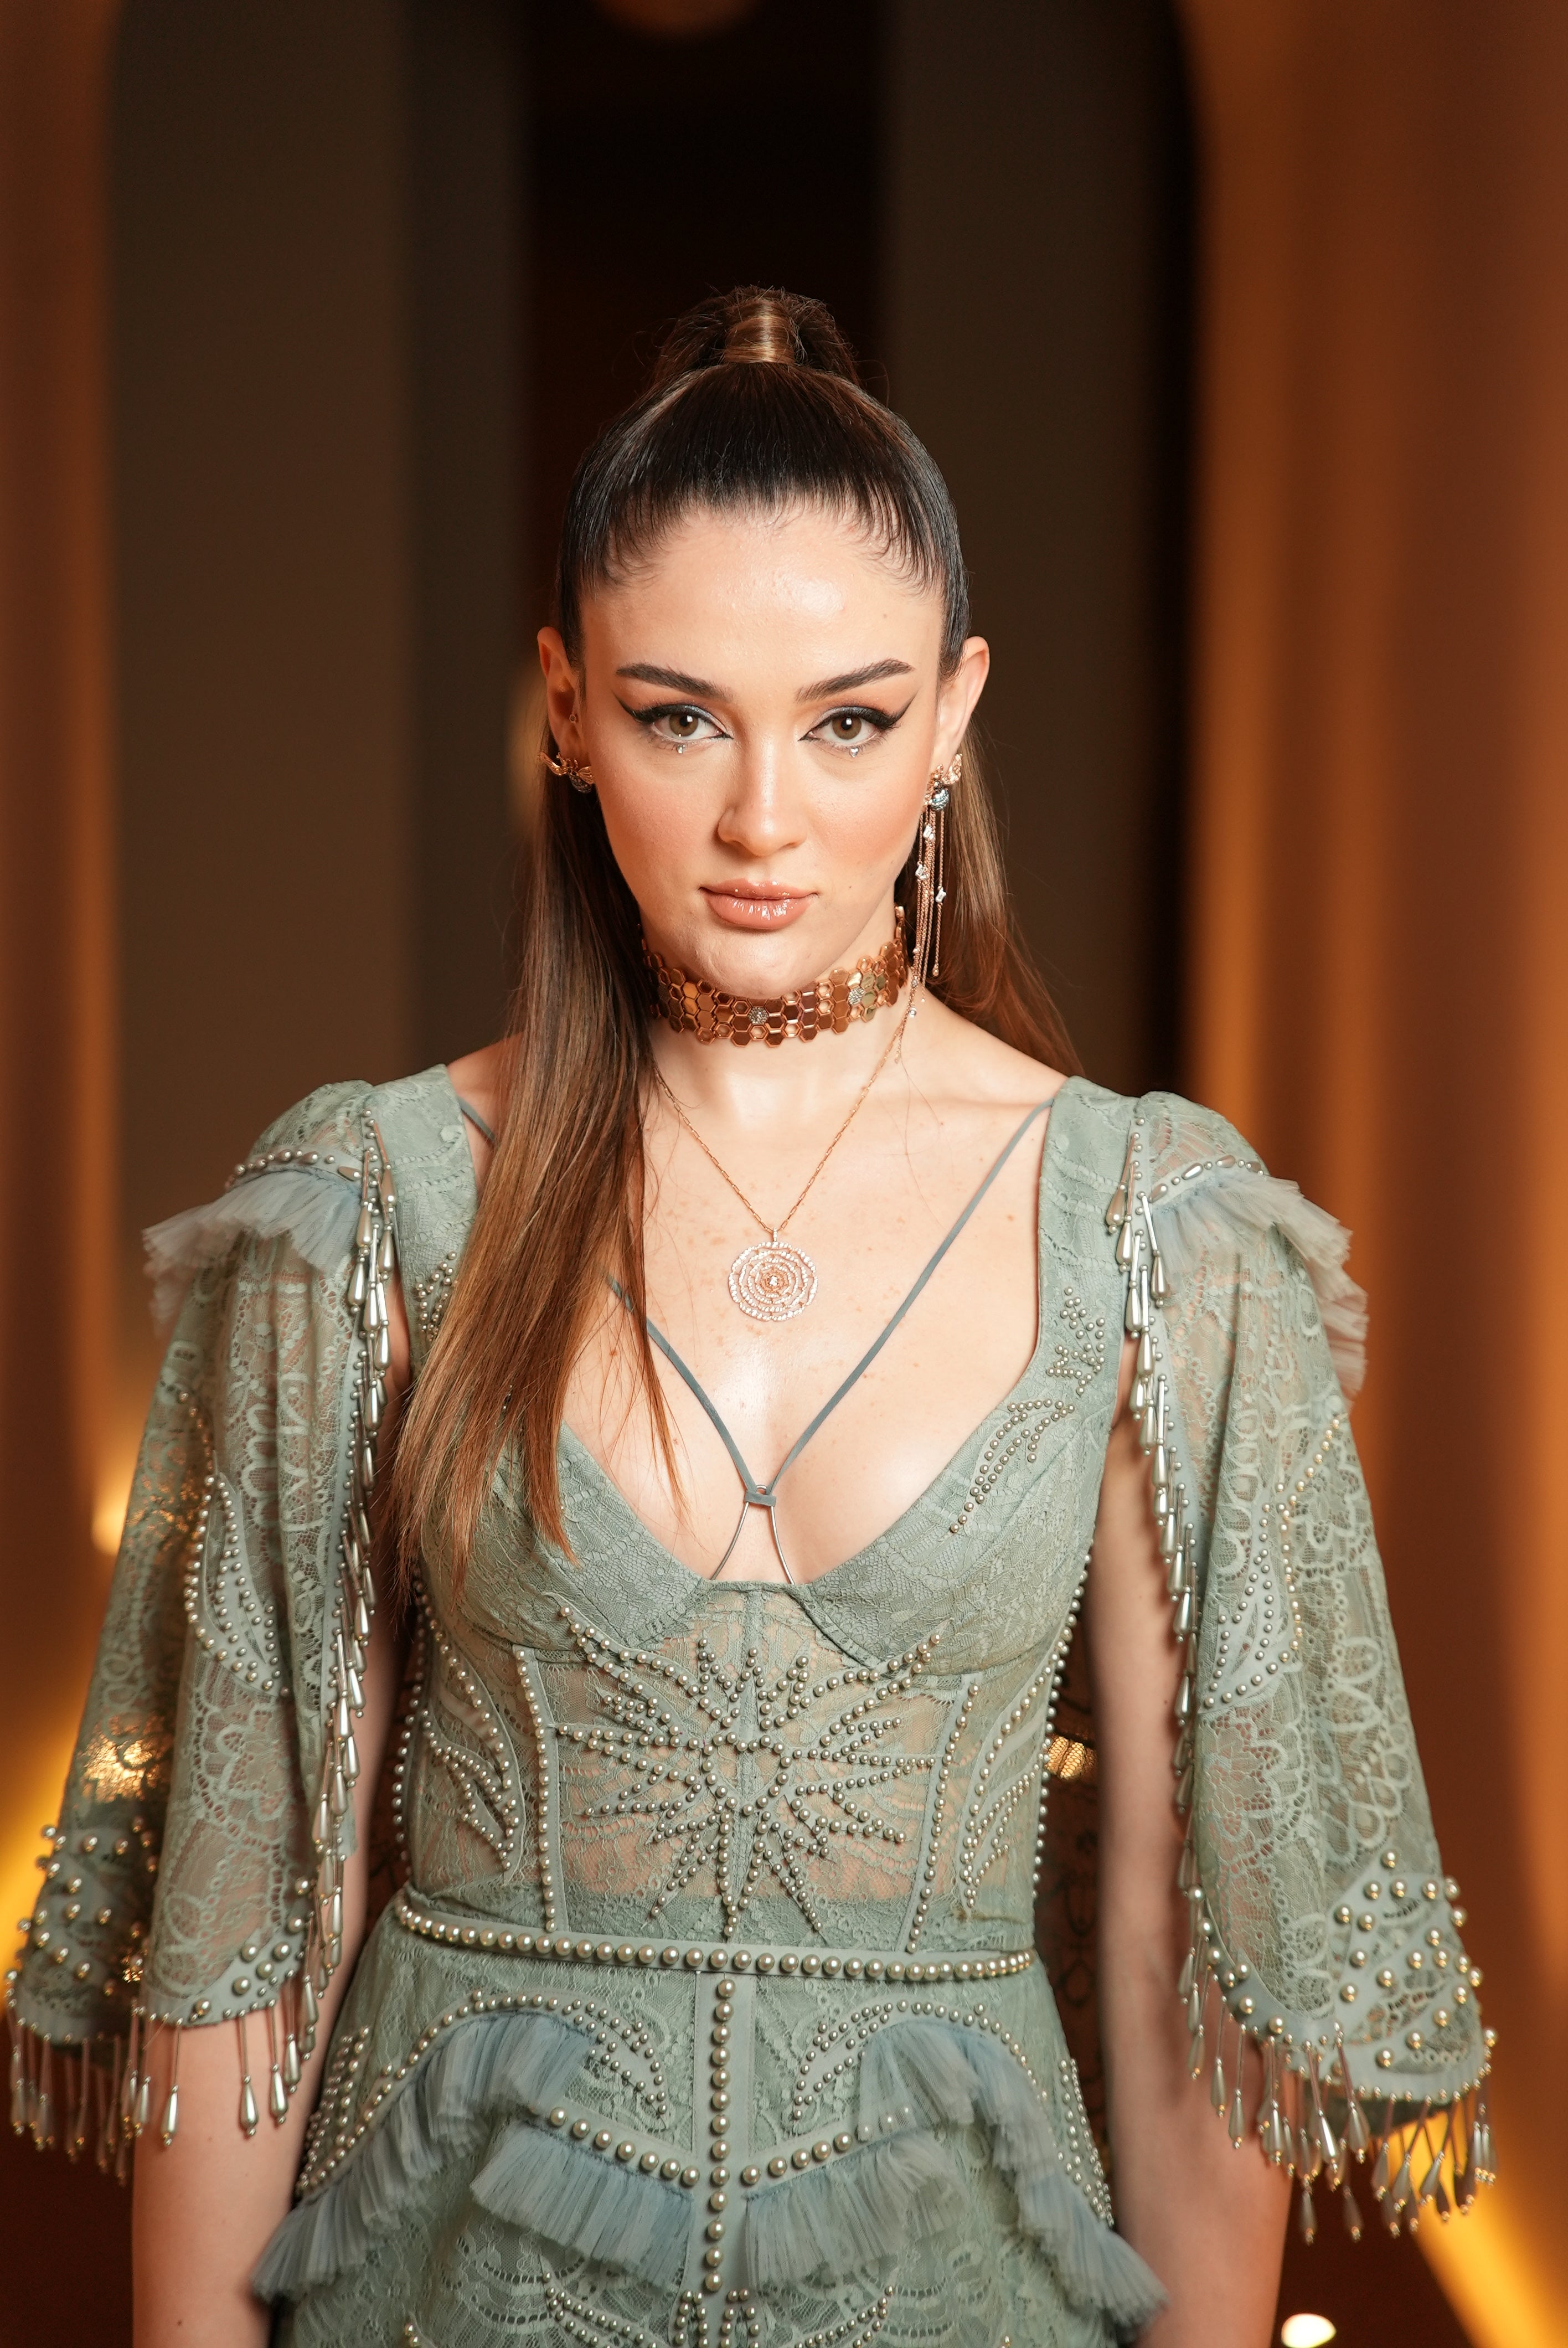 Zehra Güneş in a custom made Zeynep Tosun Couture dress for Elle Style Awards